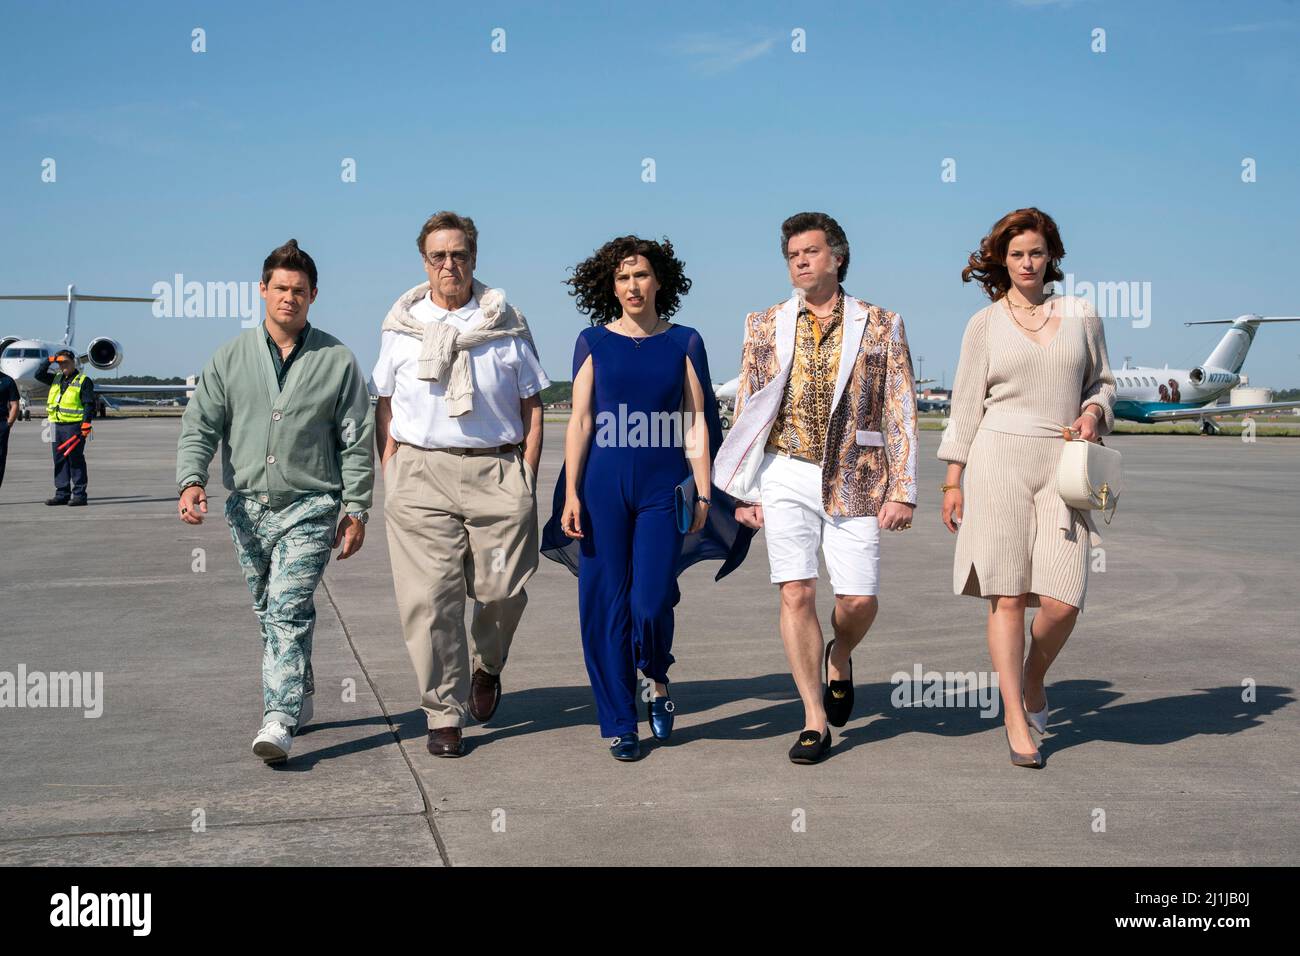 JOHN GOODMAN, DANNY MCBRIDE, ADAM DEVINE, EDI PATTERSON and CASSIDY FREEMAN in THE RIGHTEOUS GEMSTONES (2019), directed by DANNY MCBRIDE. Credit: ROUGH HOUSE PICTURES / Album Stock Photo